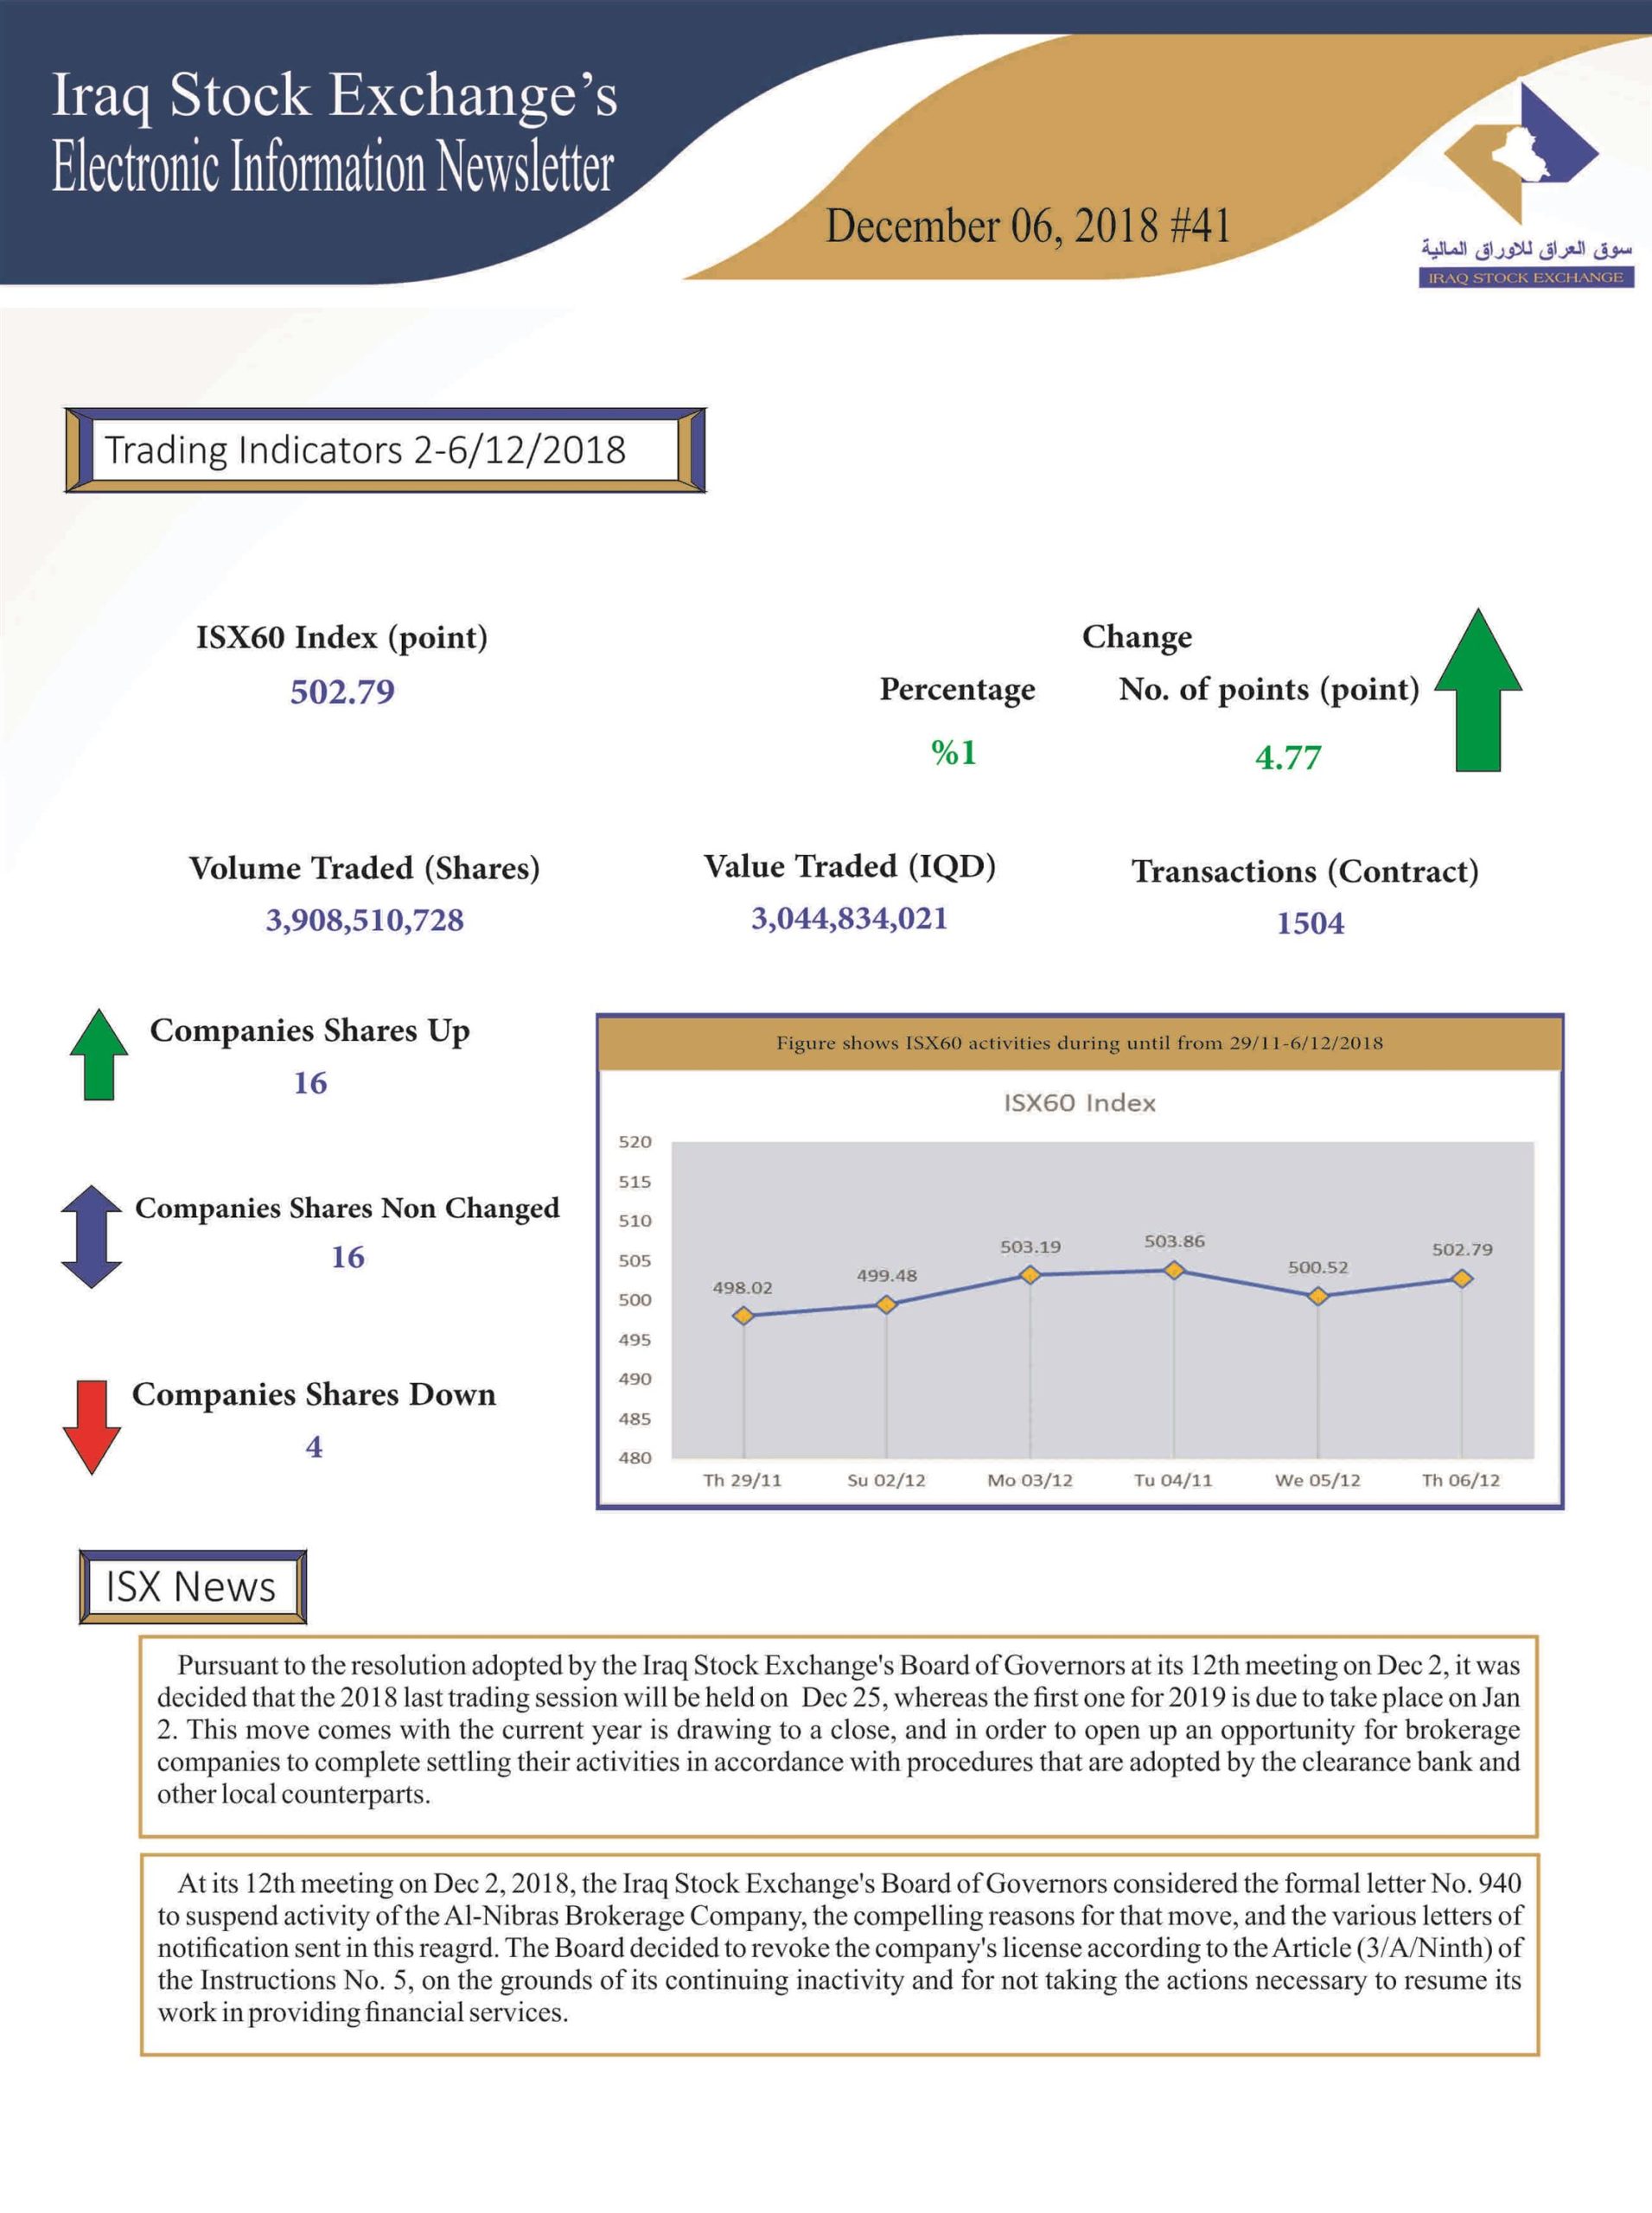 You are currently viewing Issue number 41 of (Iraq Stock Exchange’s Electronic Information weekly Newsletter)